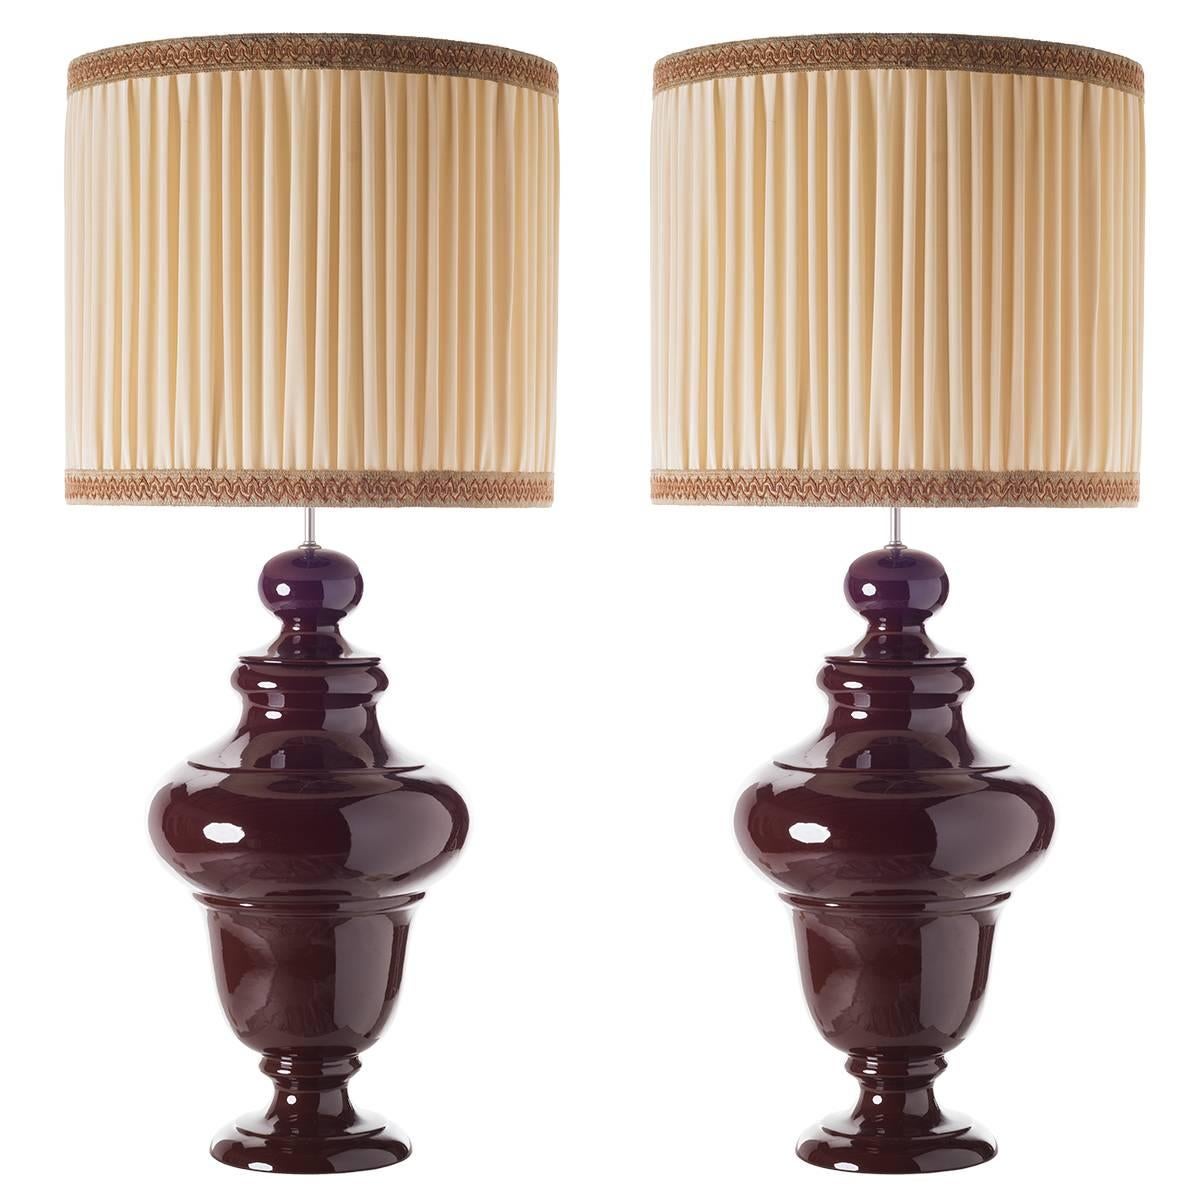 Tuscany Table Lamps, Ceramic Sinuous Shaped Pair For Sale